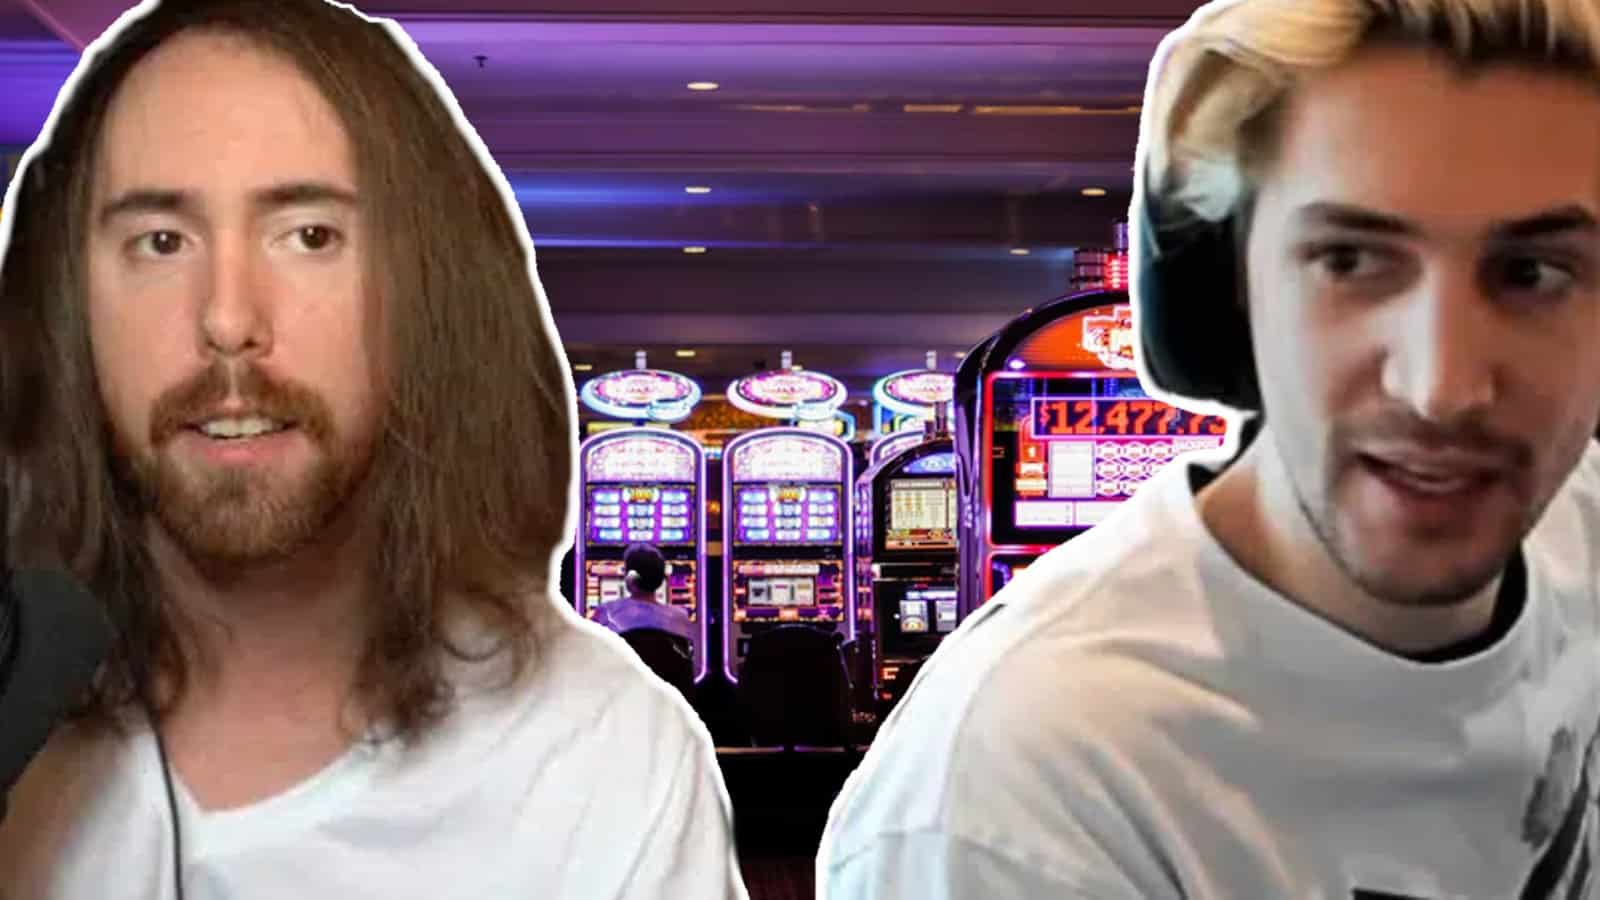 Asmongold and xQc in front of gambling machines